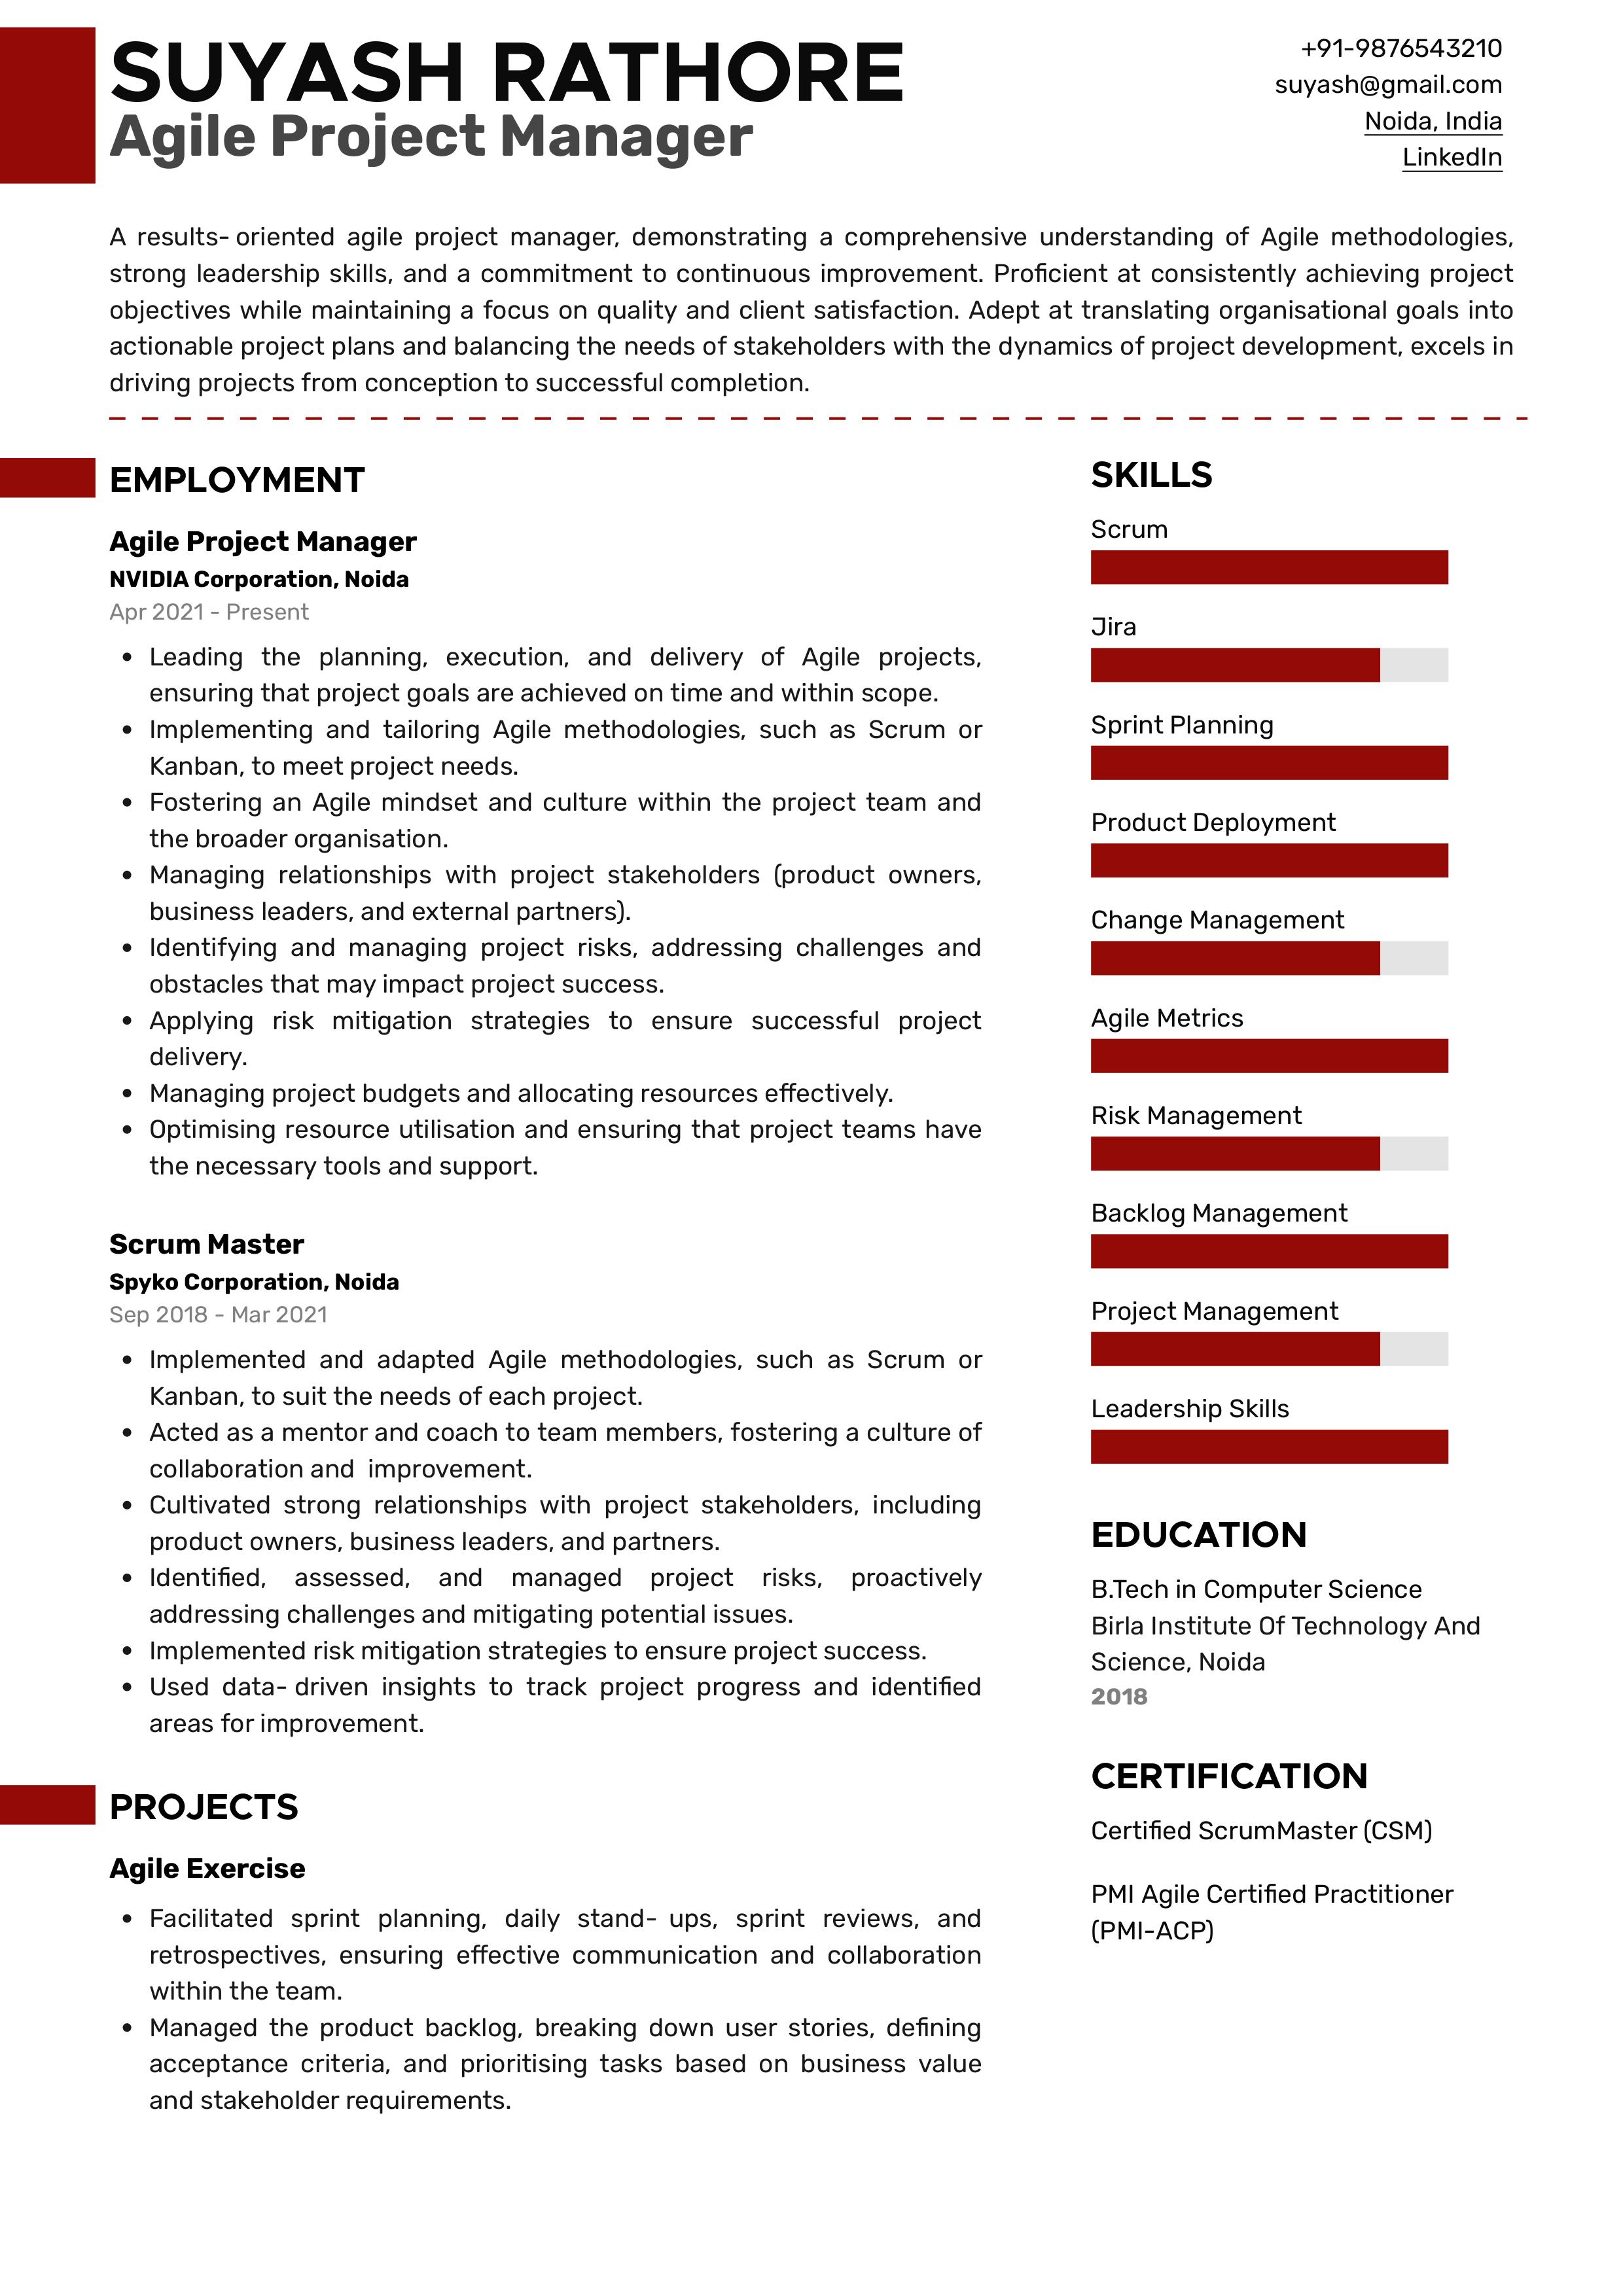 Sample Resume of  Agile Project Manager | Free Resume Templates & Samples on Resumod.co